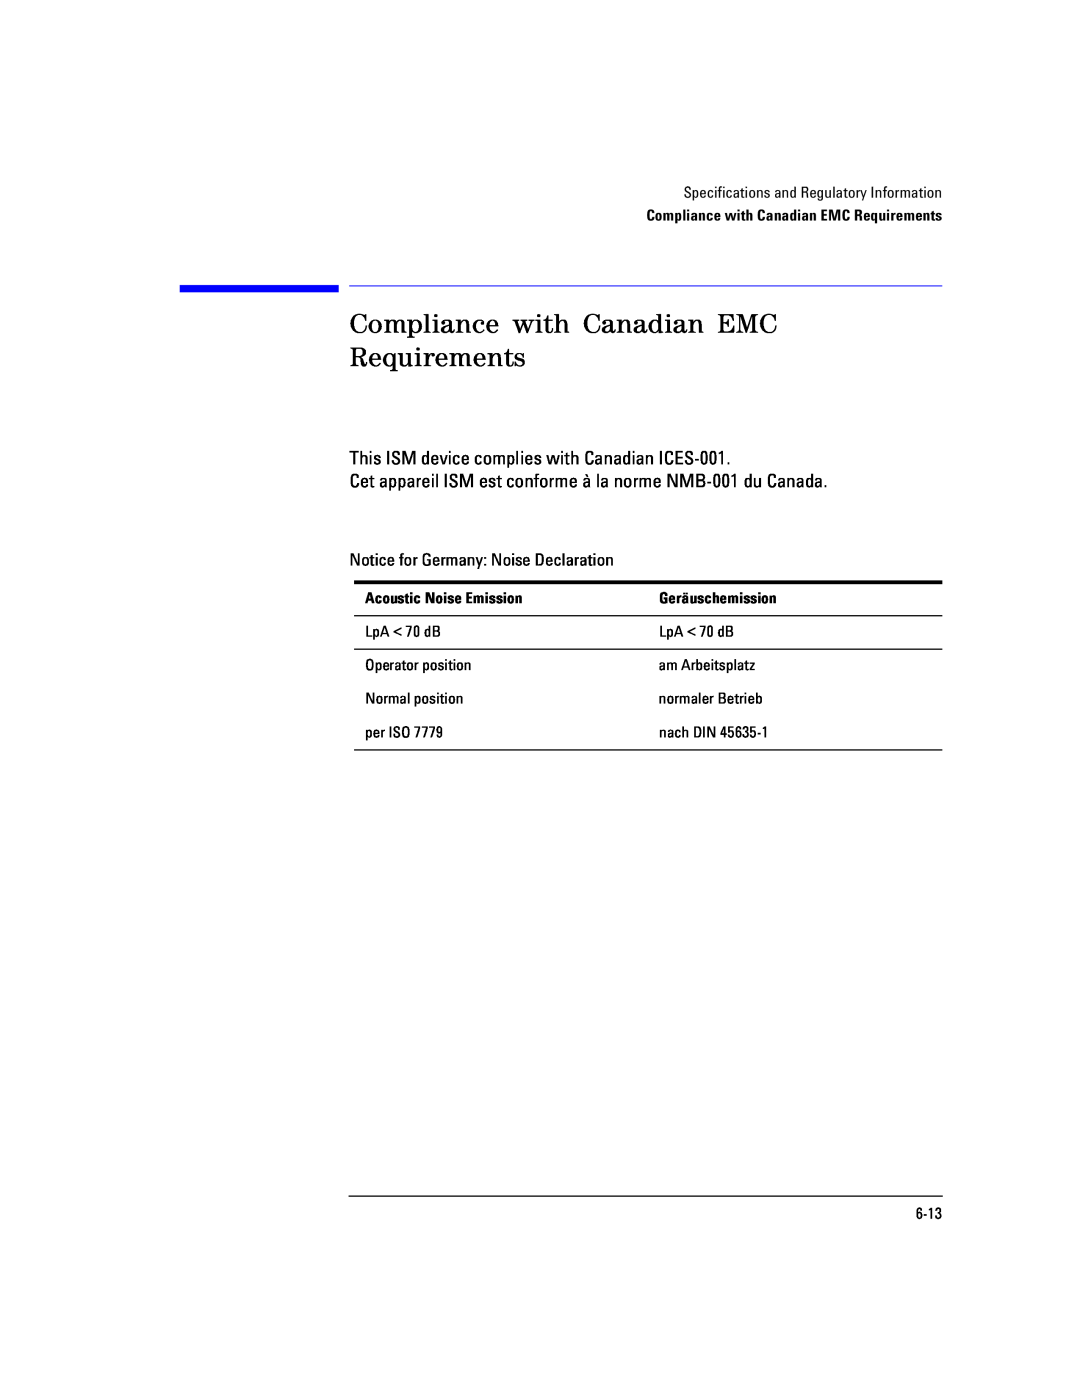 Agilent Technologies Agilent 86120C manual Compliance with Canadian EMC Requirements, Notice for Germany Noise Declaration 